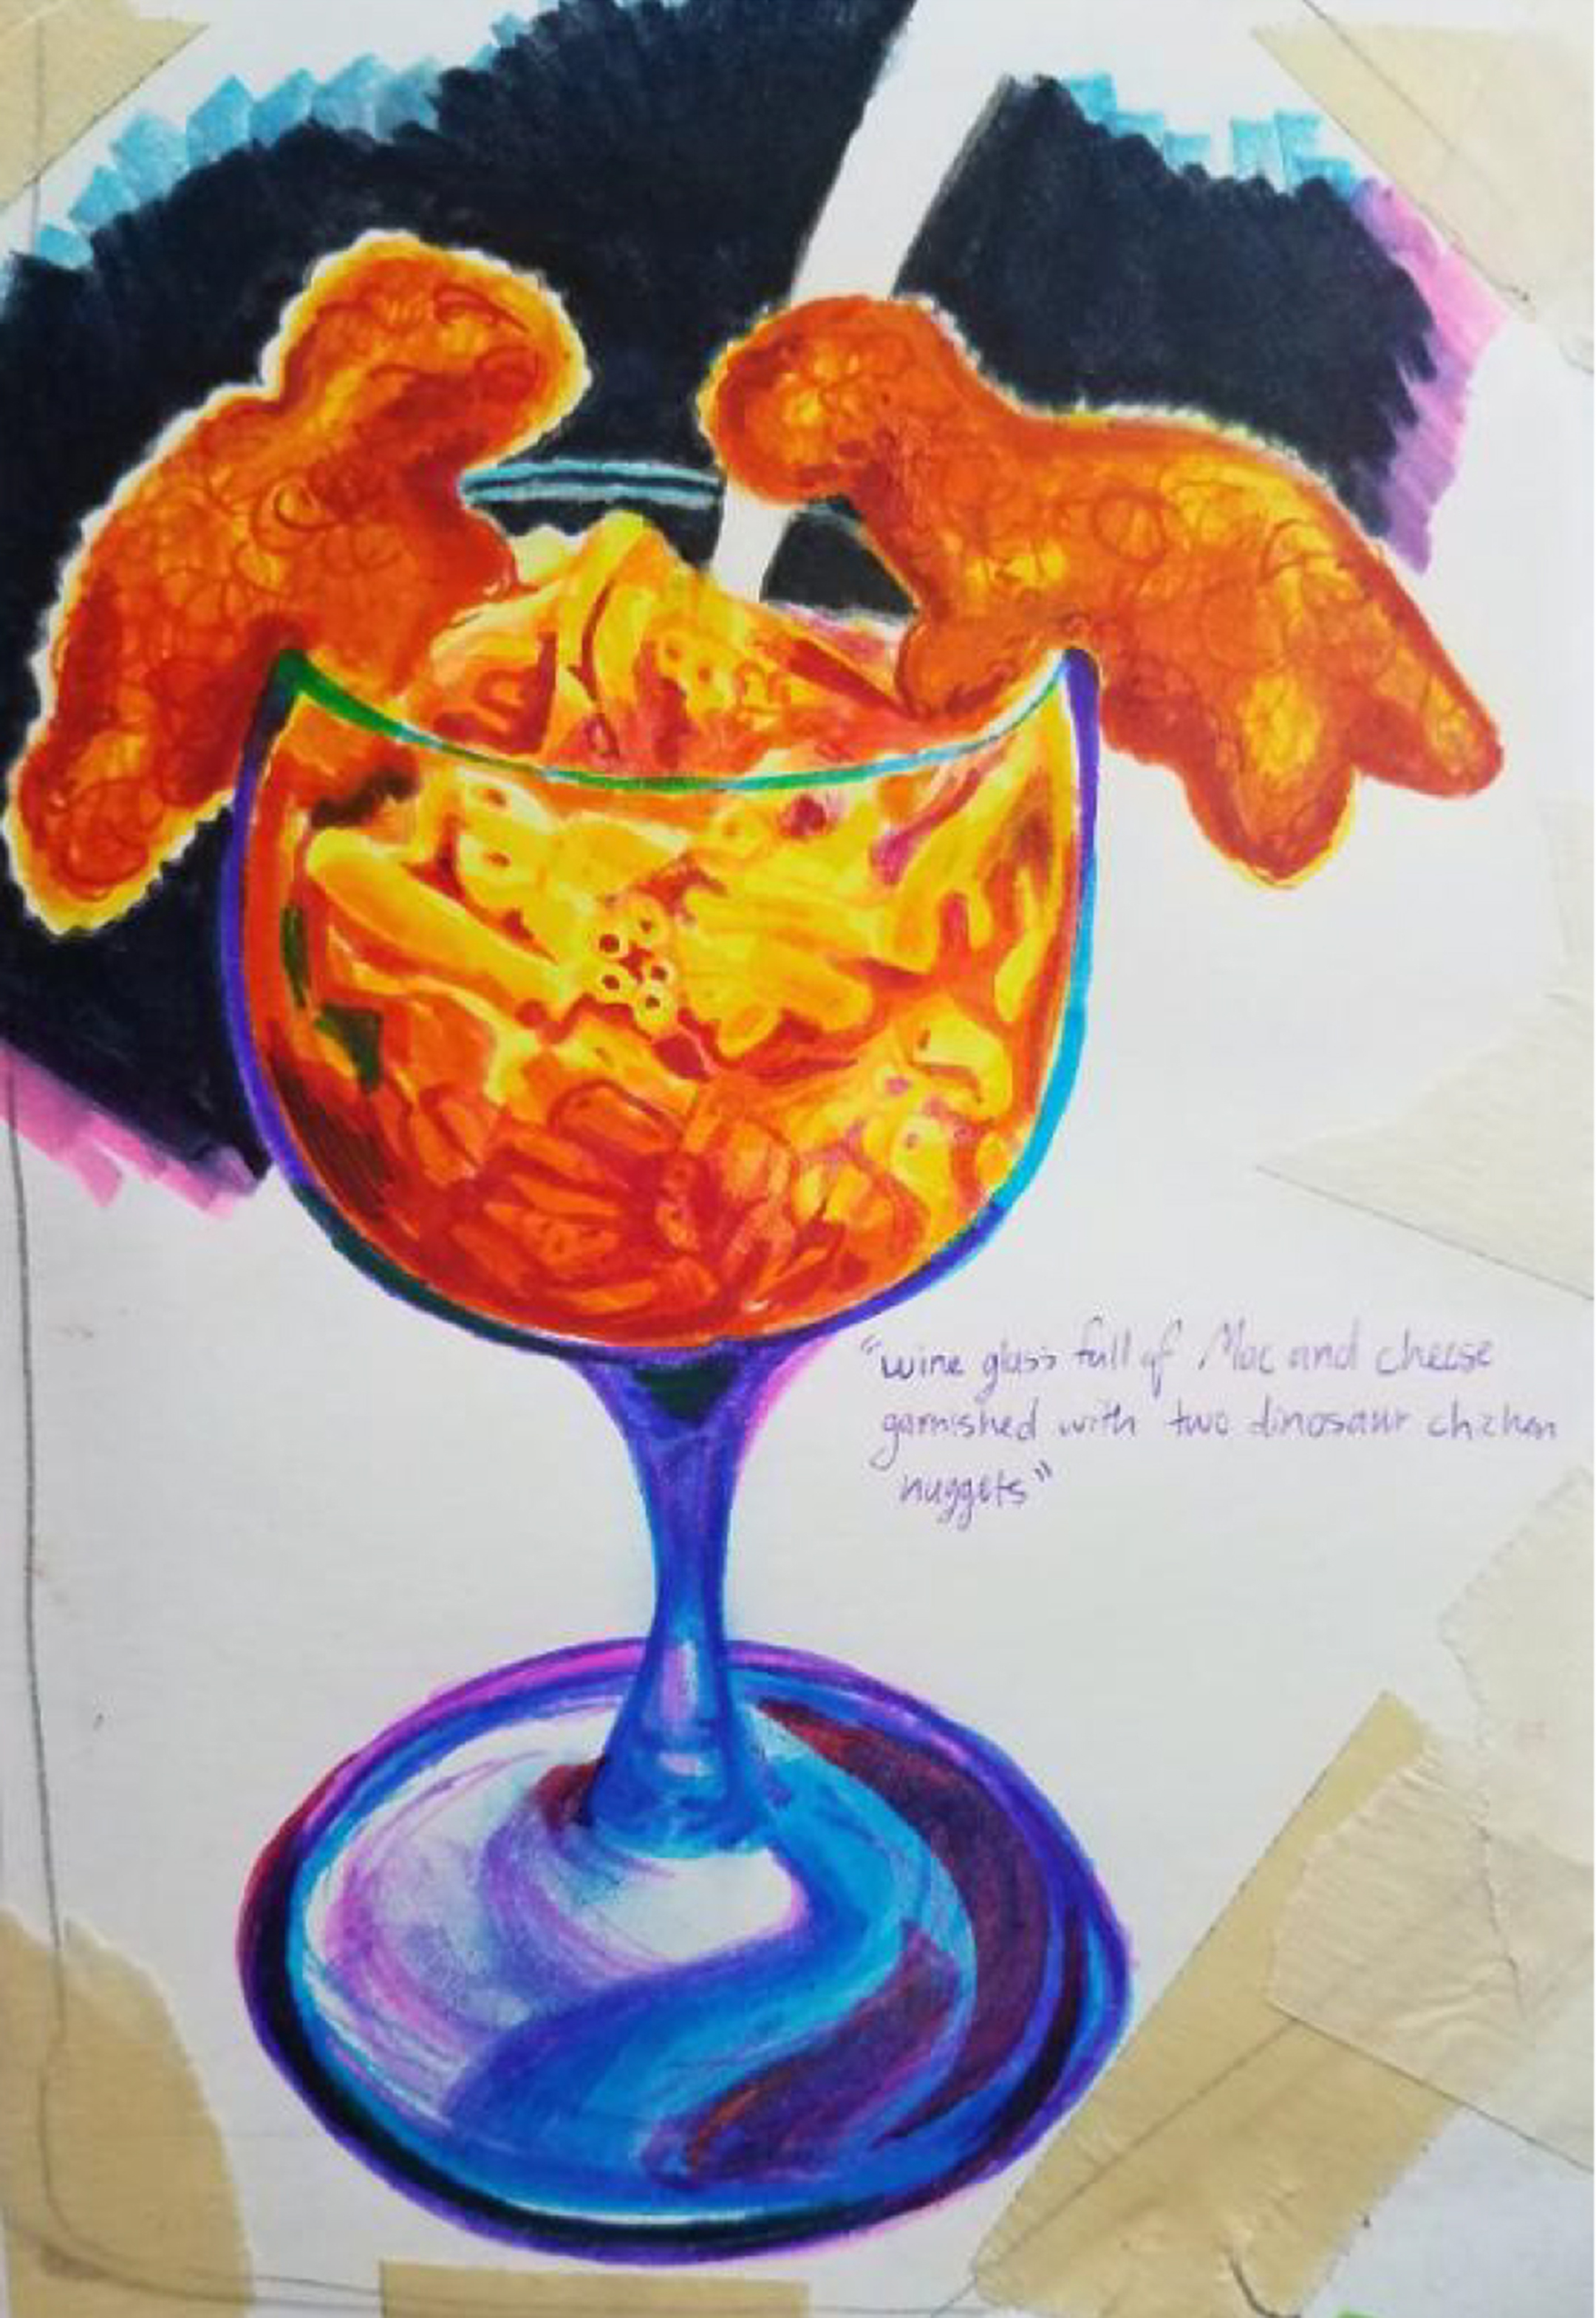 Cartoon illustration of a wine glass with a cheesy food inside